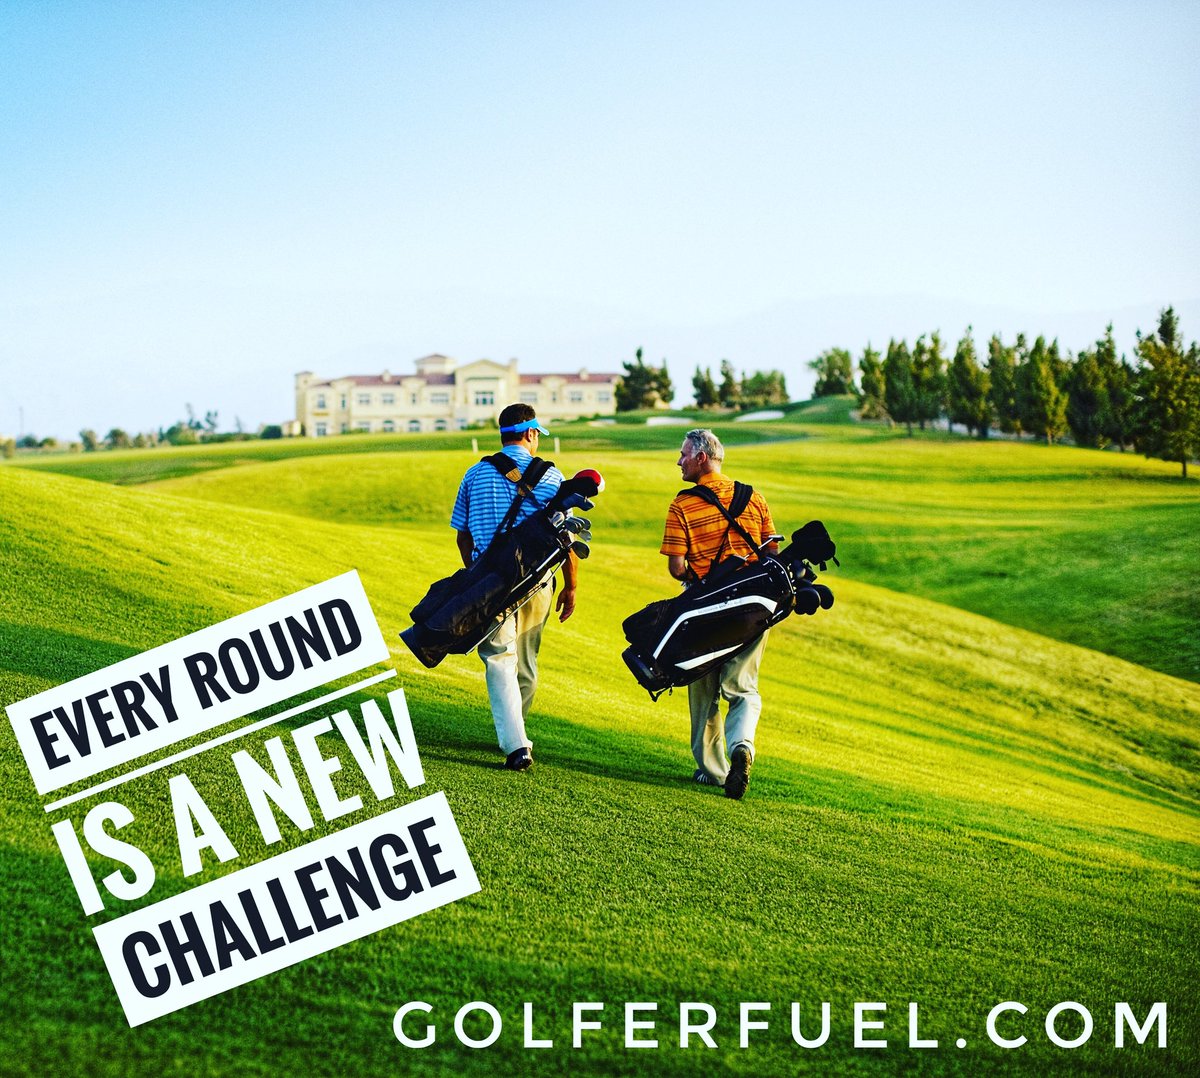 The beauty of the game is that it never stops challenging you as long as you keep challenging yourself. Never give up.

#golftips #golflife #golftime #golflover #golfcoaching #golfhelp #golfquotes #golfconfidence #golffocus #cbdgolf #golfing #golferfuel #golfmotivation #beawinner